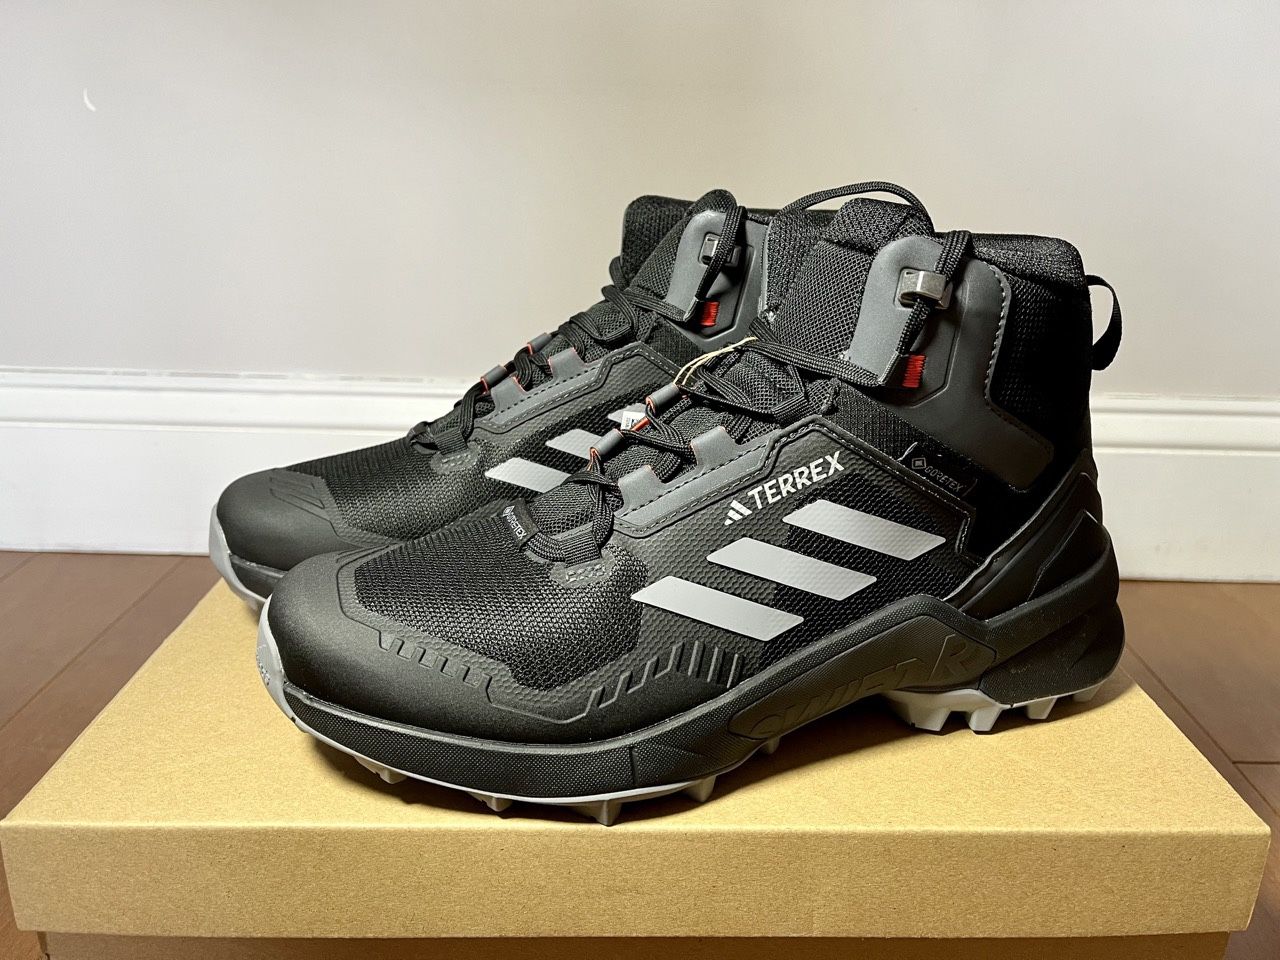 Adidas Terrex Swift R3 Mid Gore-Tex Hiking Shoes men size 9.5 NEW with box